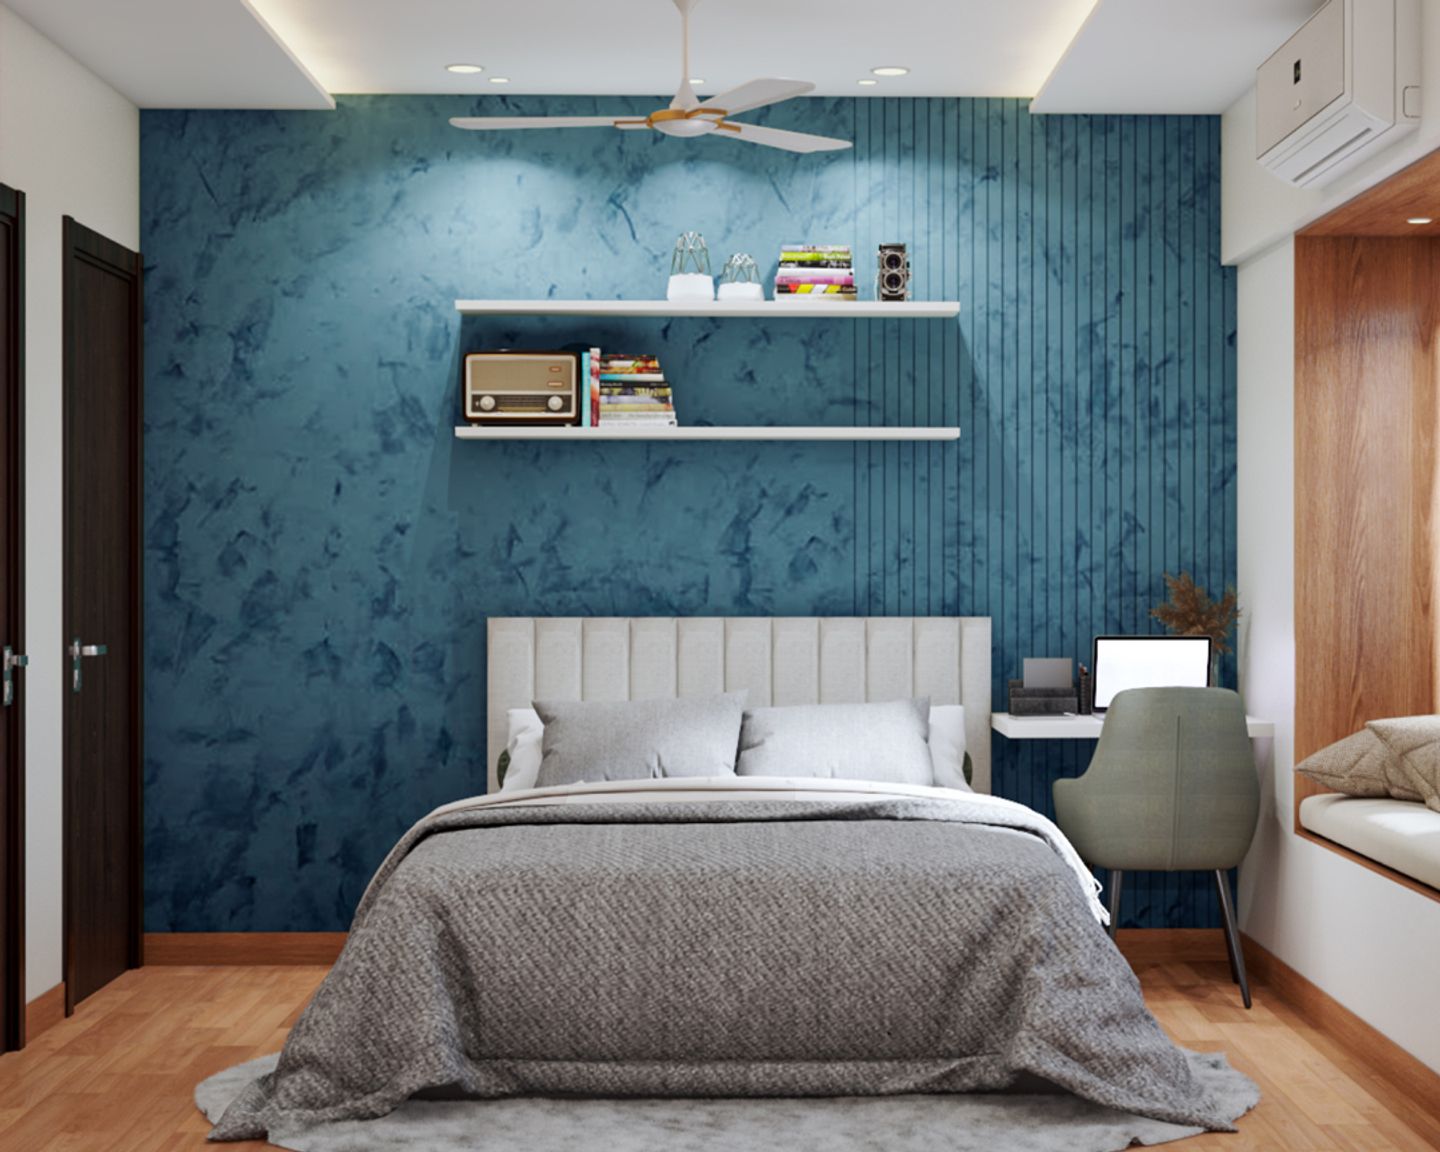 Guest Bedroom With Blue Accent Wall - Livspace